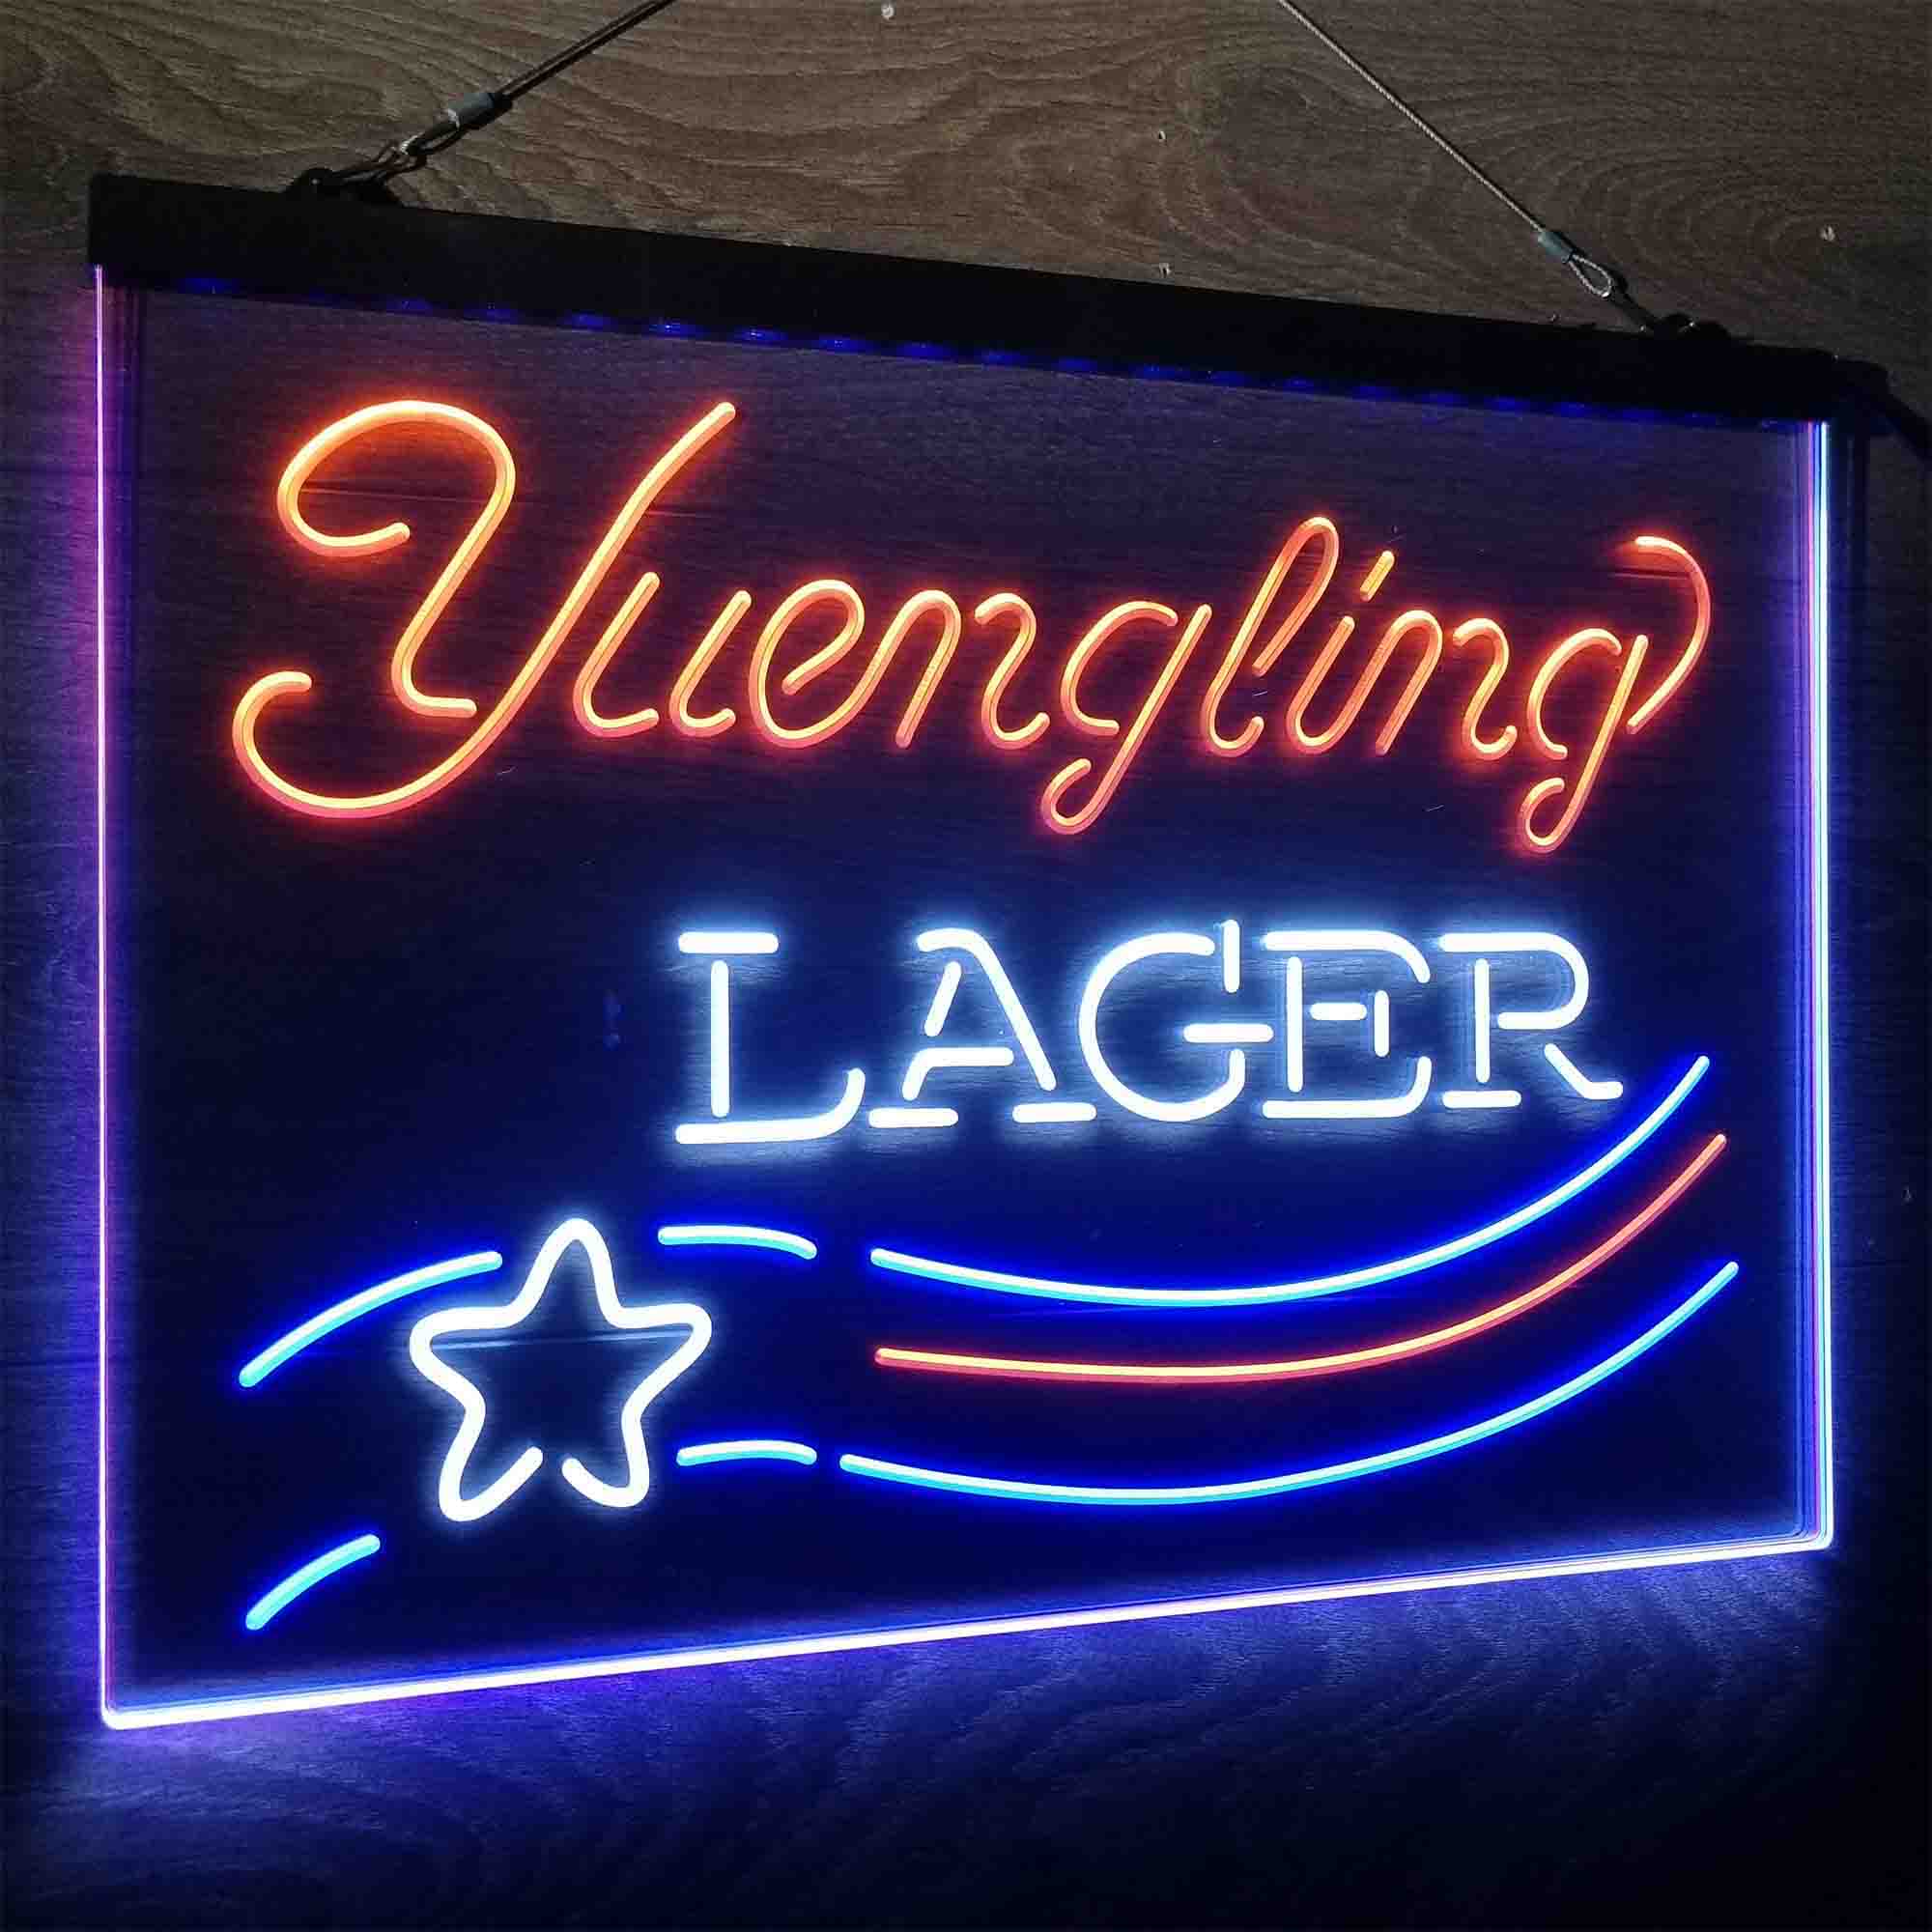 Yuengling Beer Larger Bar Neon LED Sign 3 Colors